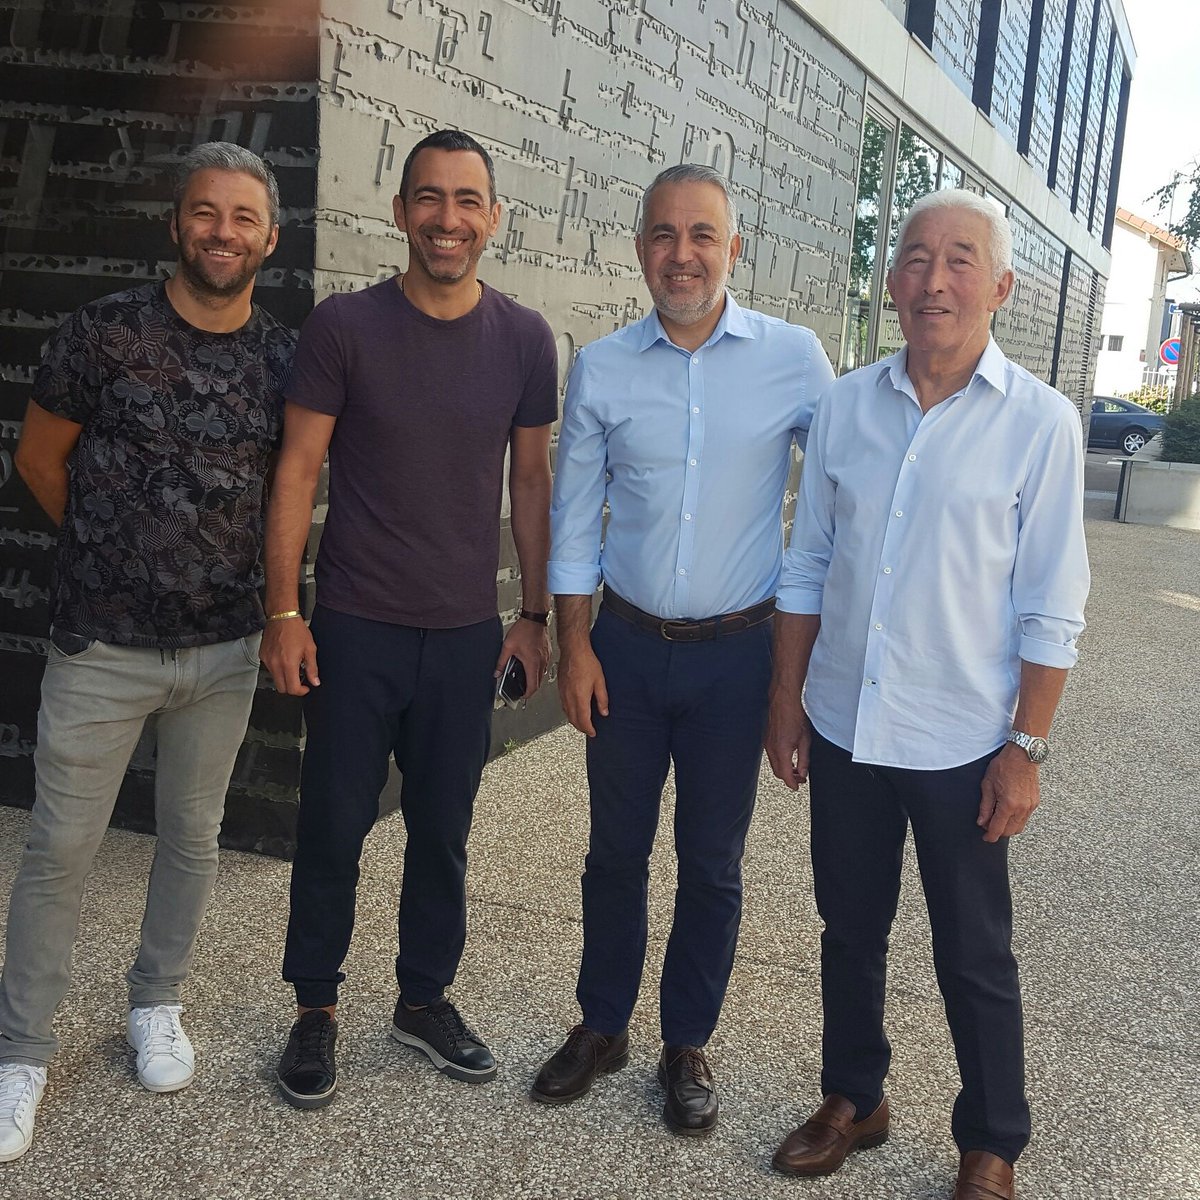 Brothers Micha, Yuri and Dennis Djorkaeff in Front of Armenian Memorial Center with their father Jean